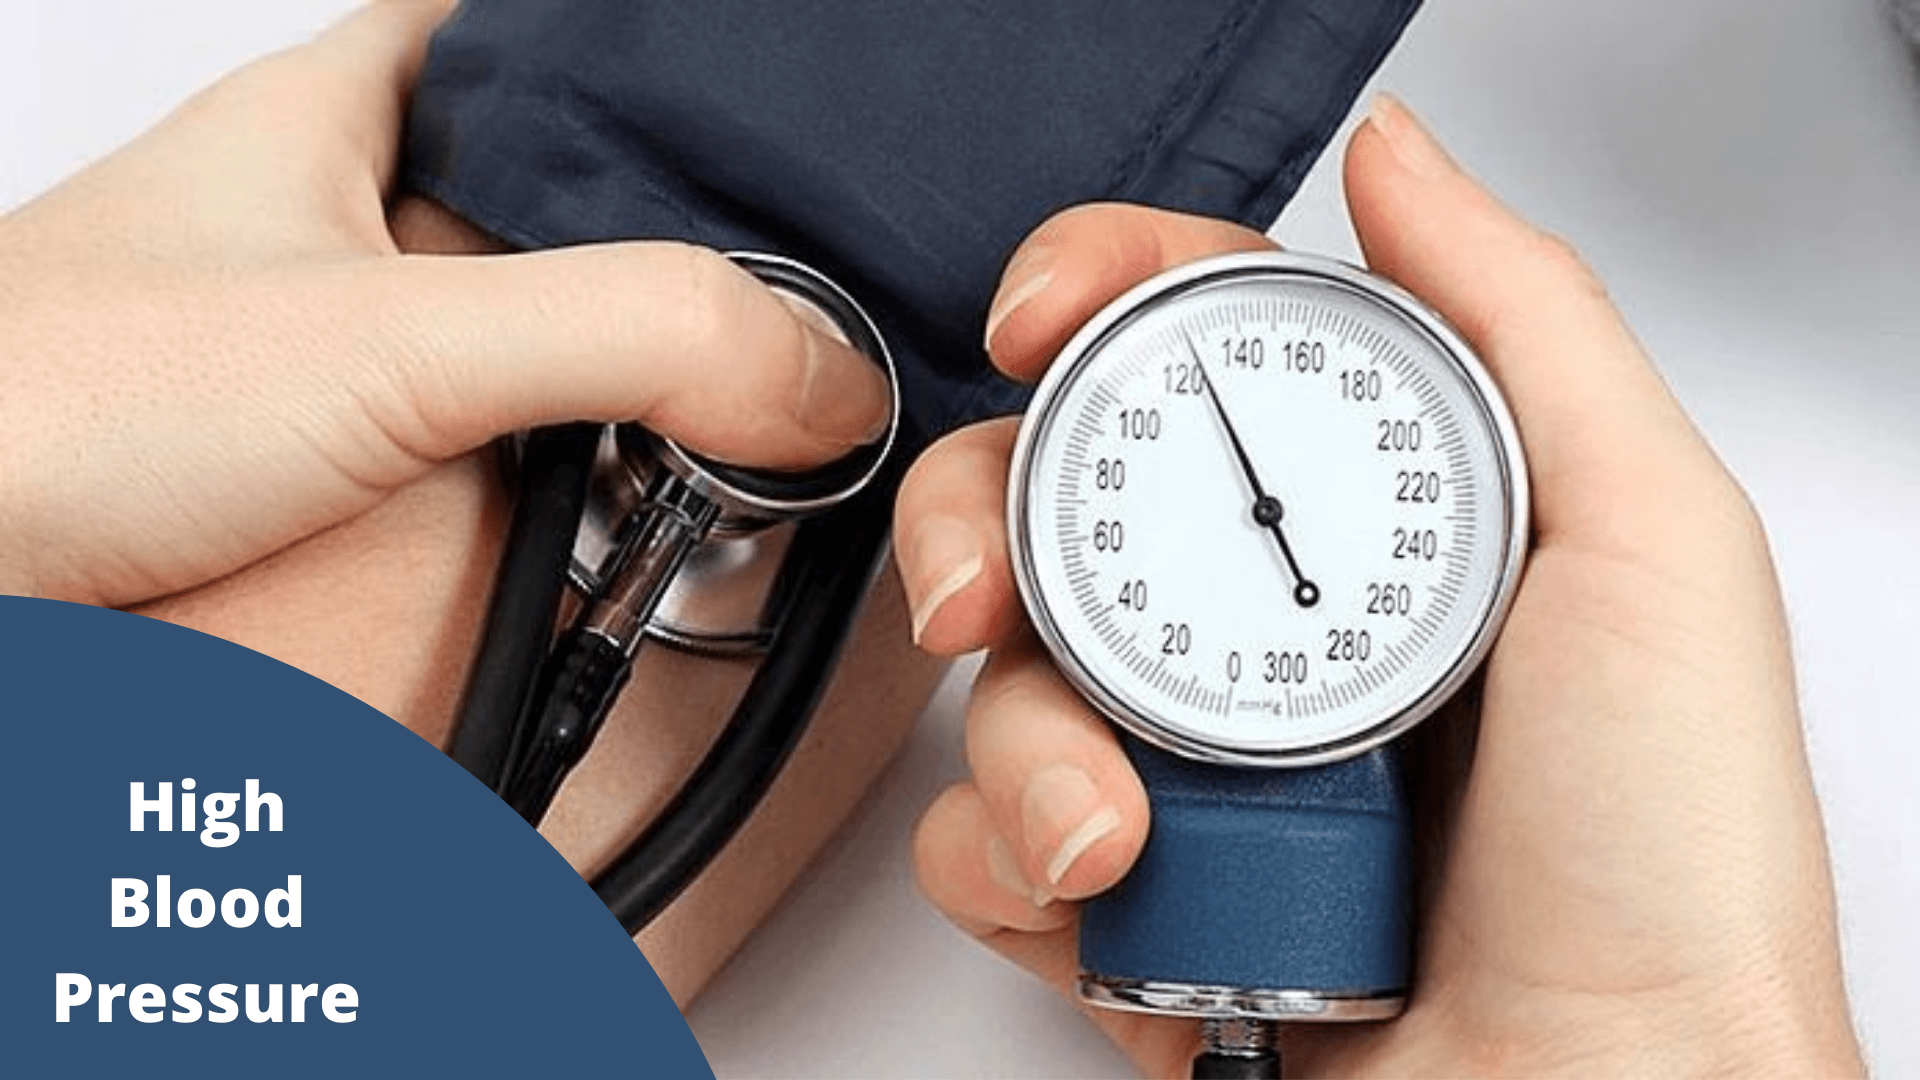 High Blood Pressure: What Can You Do to Manage?